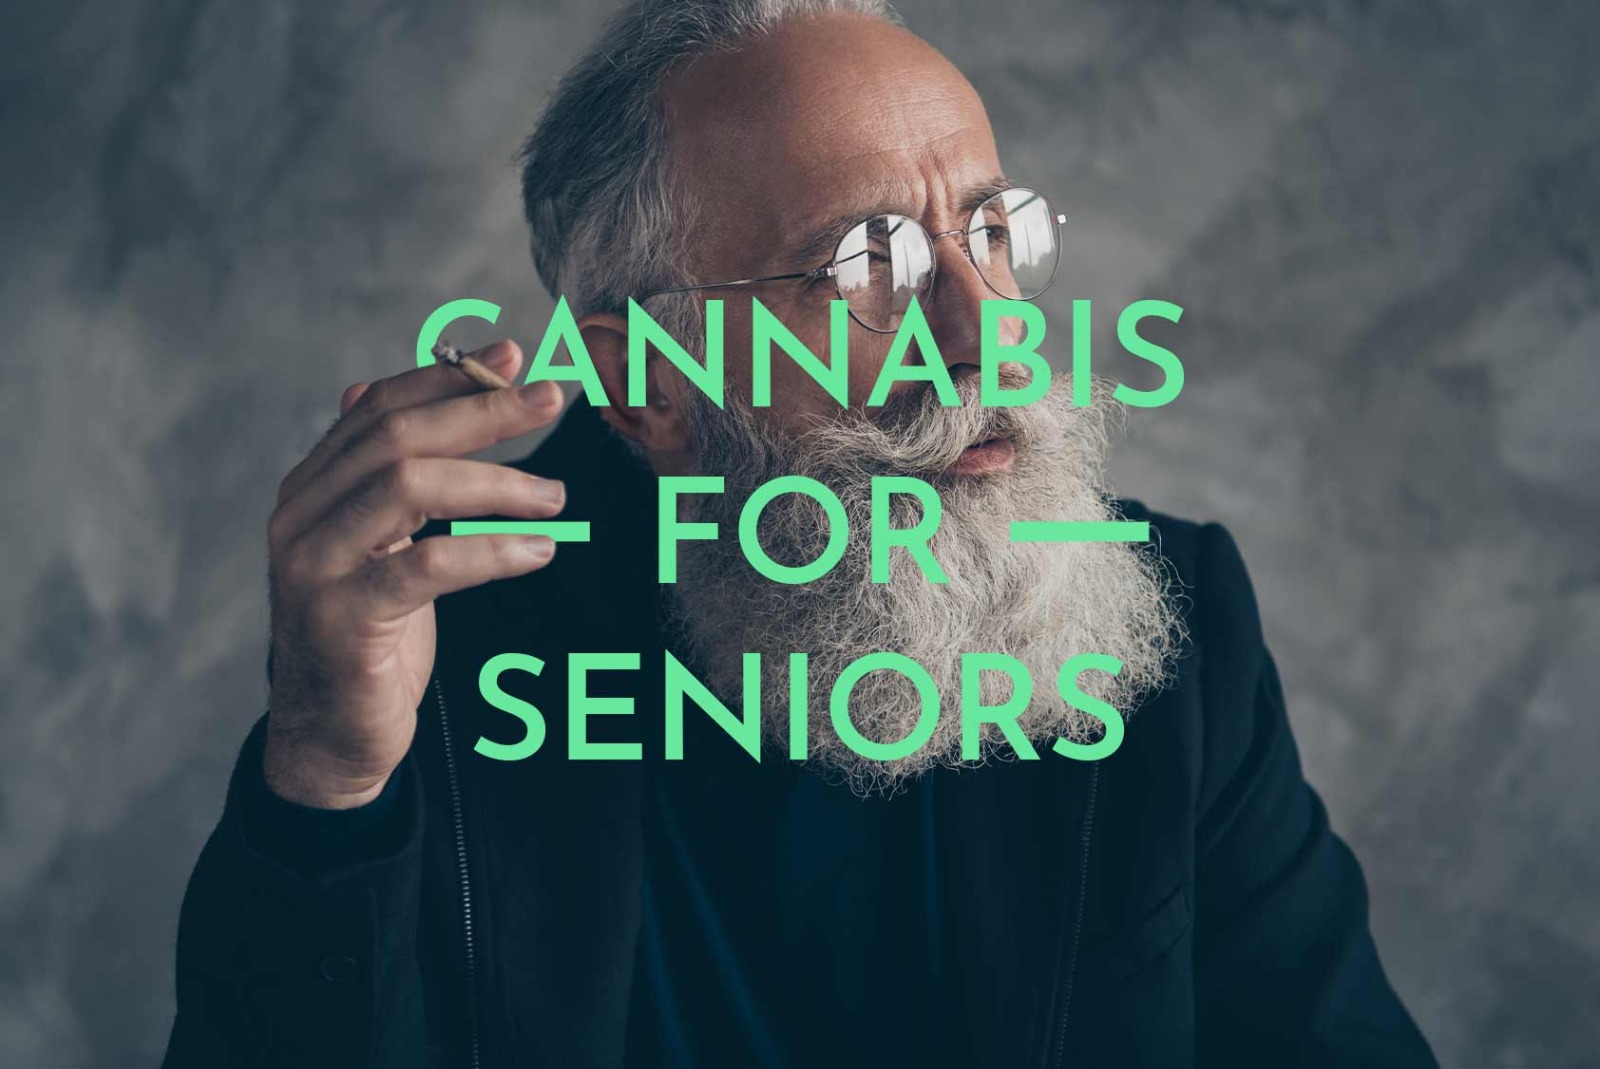 Cannabis For Seniors over an old man smoking weed